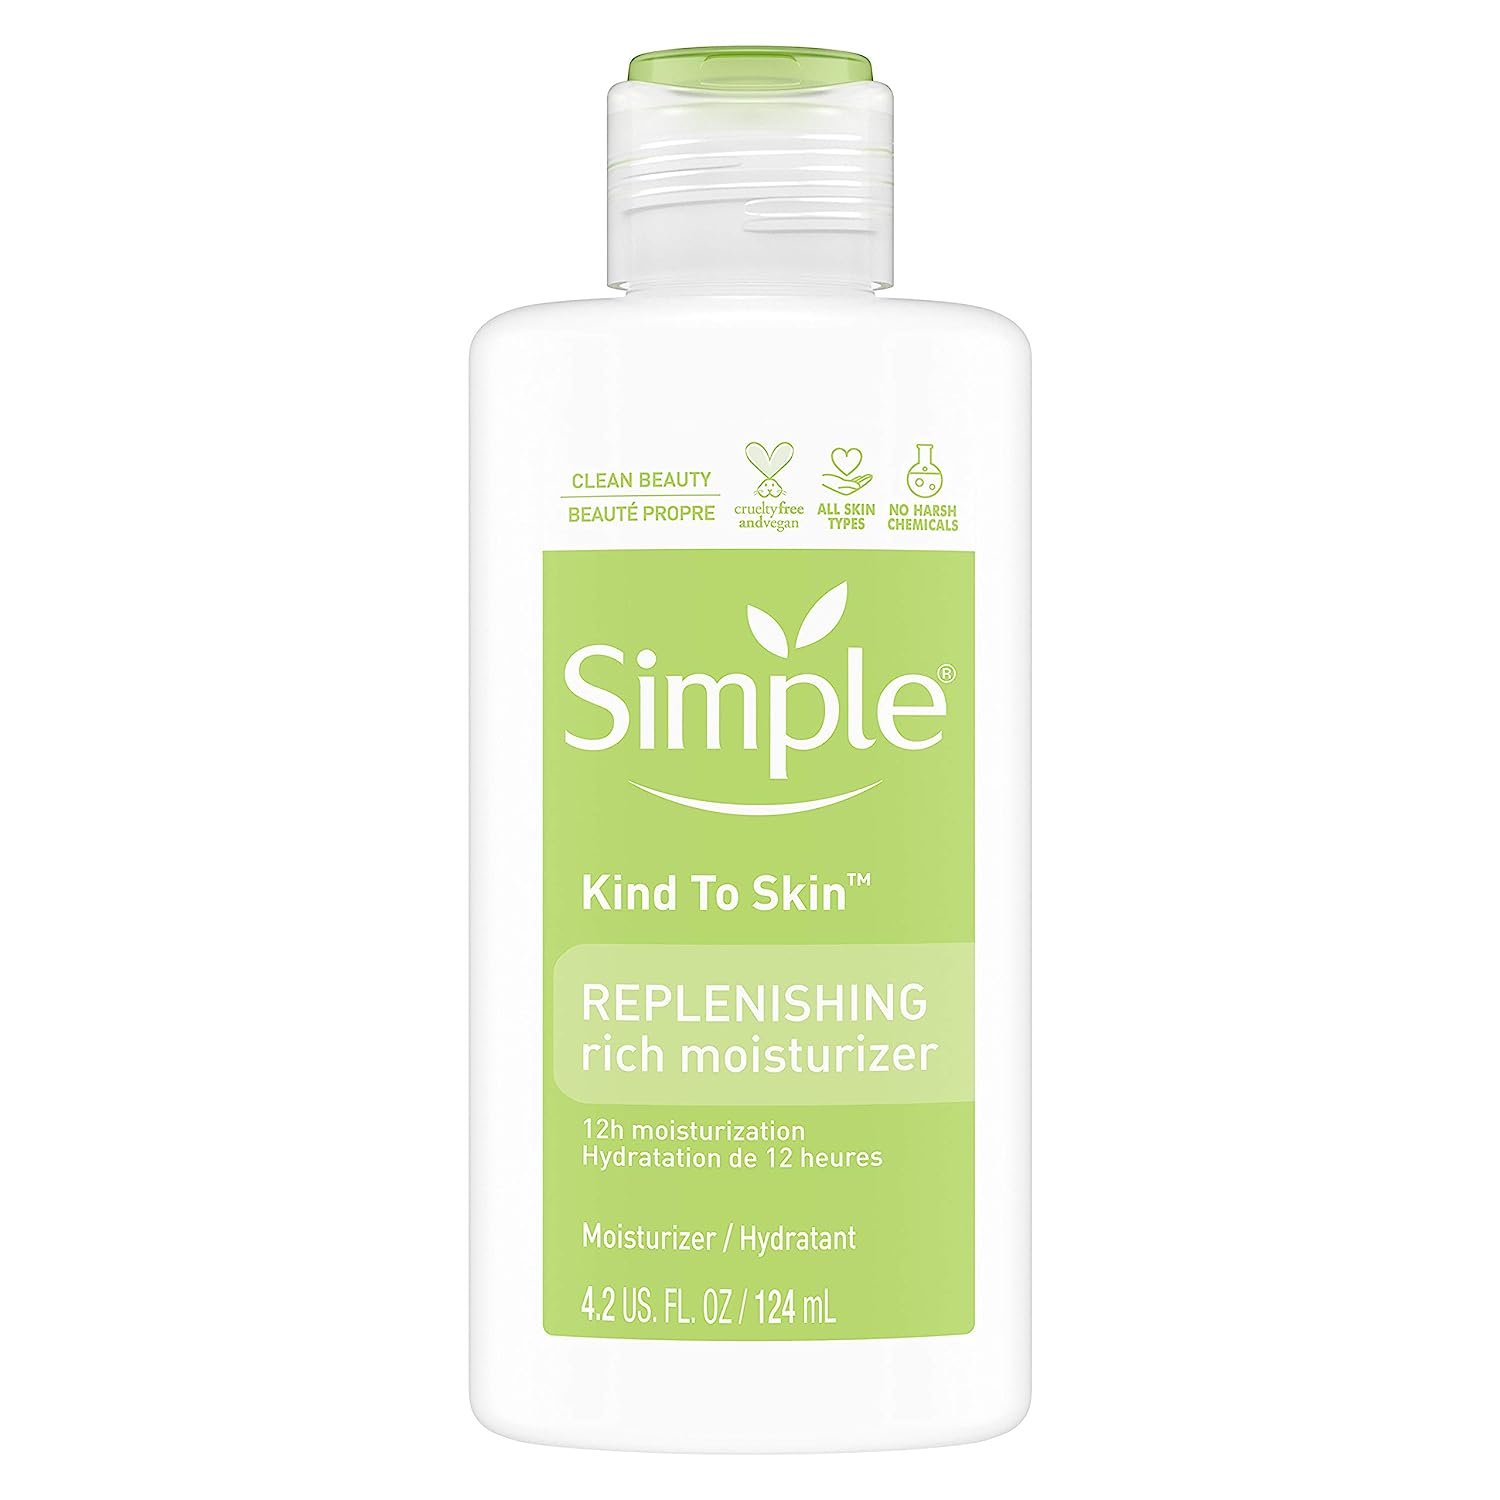 Simple Kind to Skin Face Moisturizer Replenishing Rich 12-Hour Moisturization for All Skin Types, 4.2 fl oz - image 1 of 12